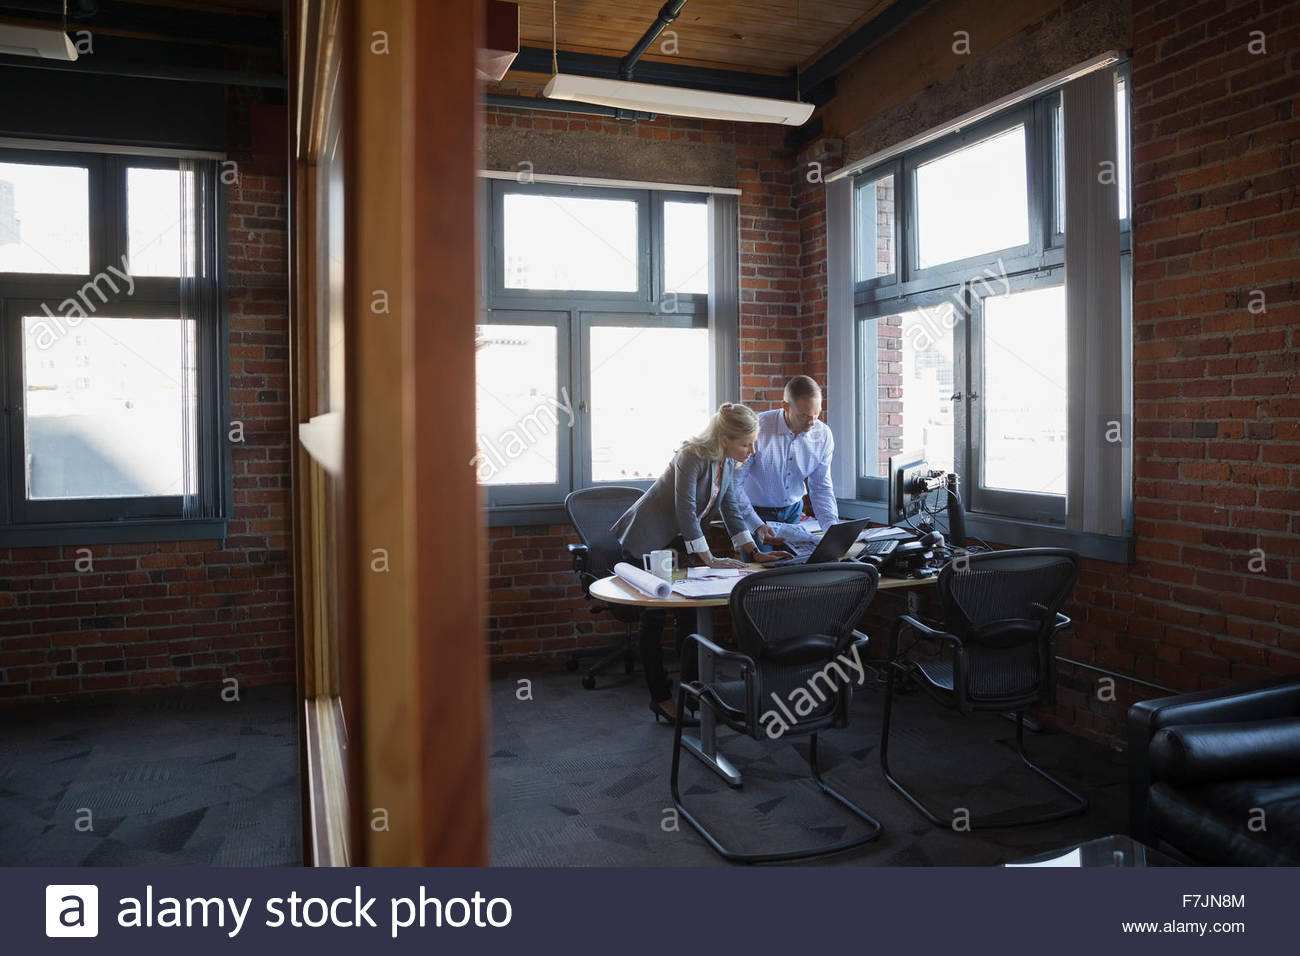 Business people working at office desk Stock Photo